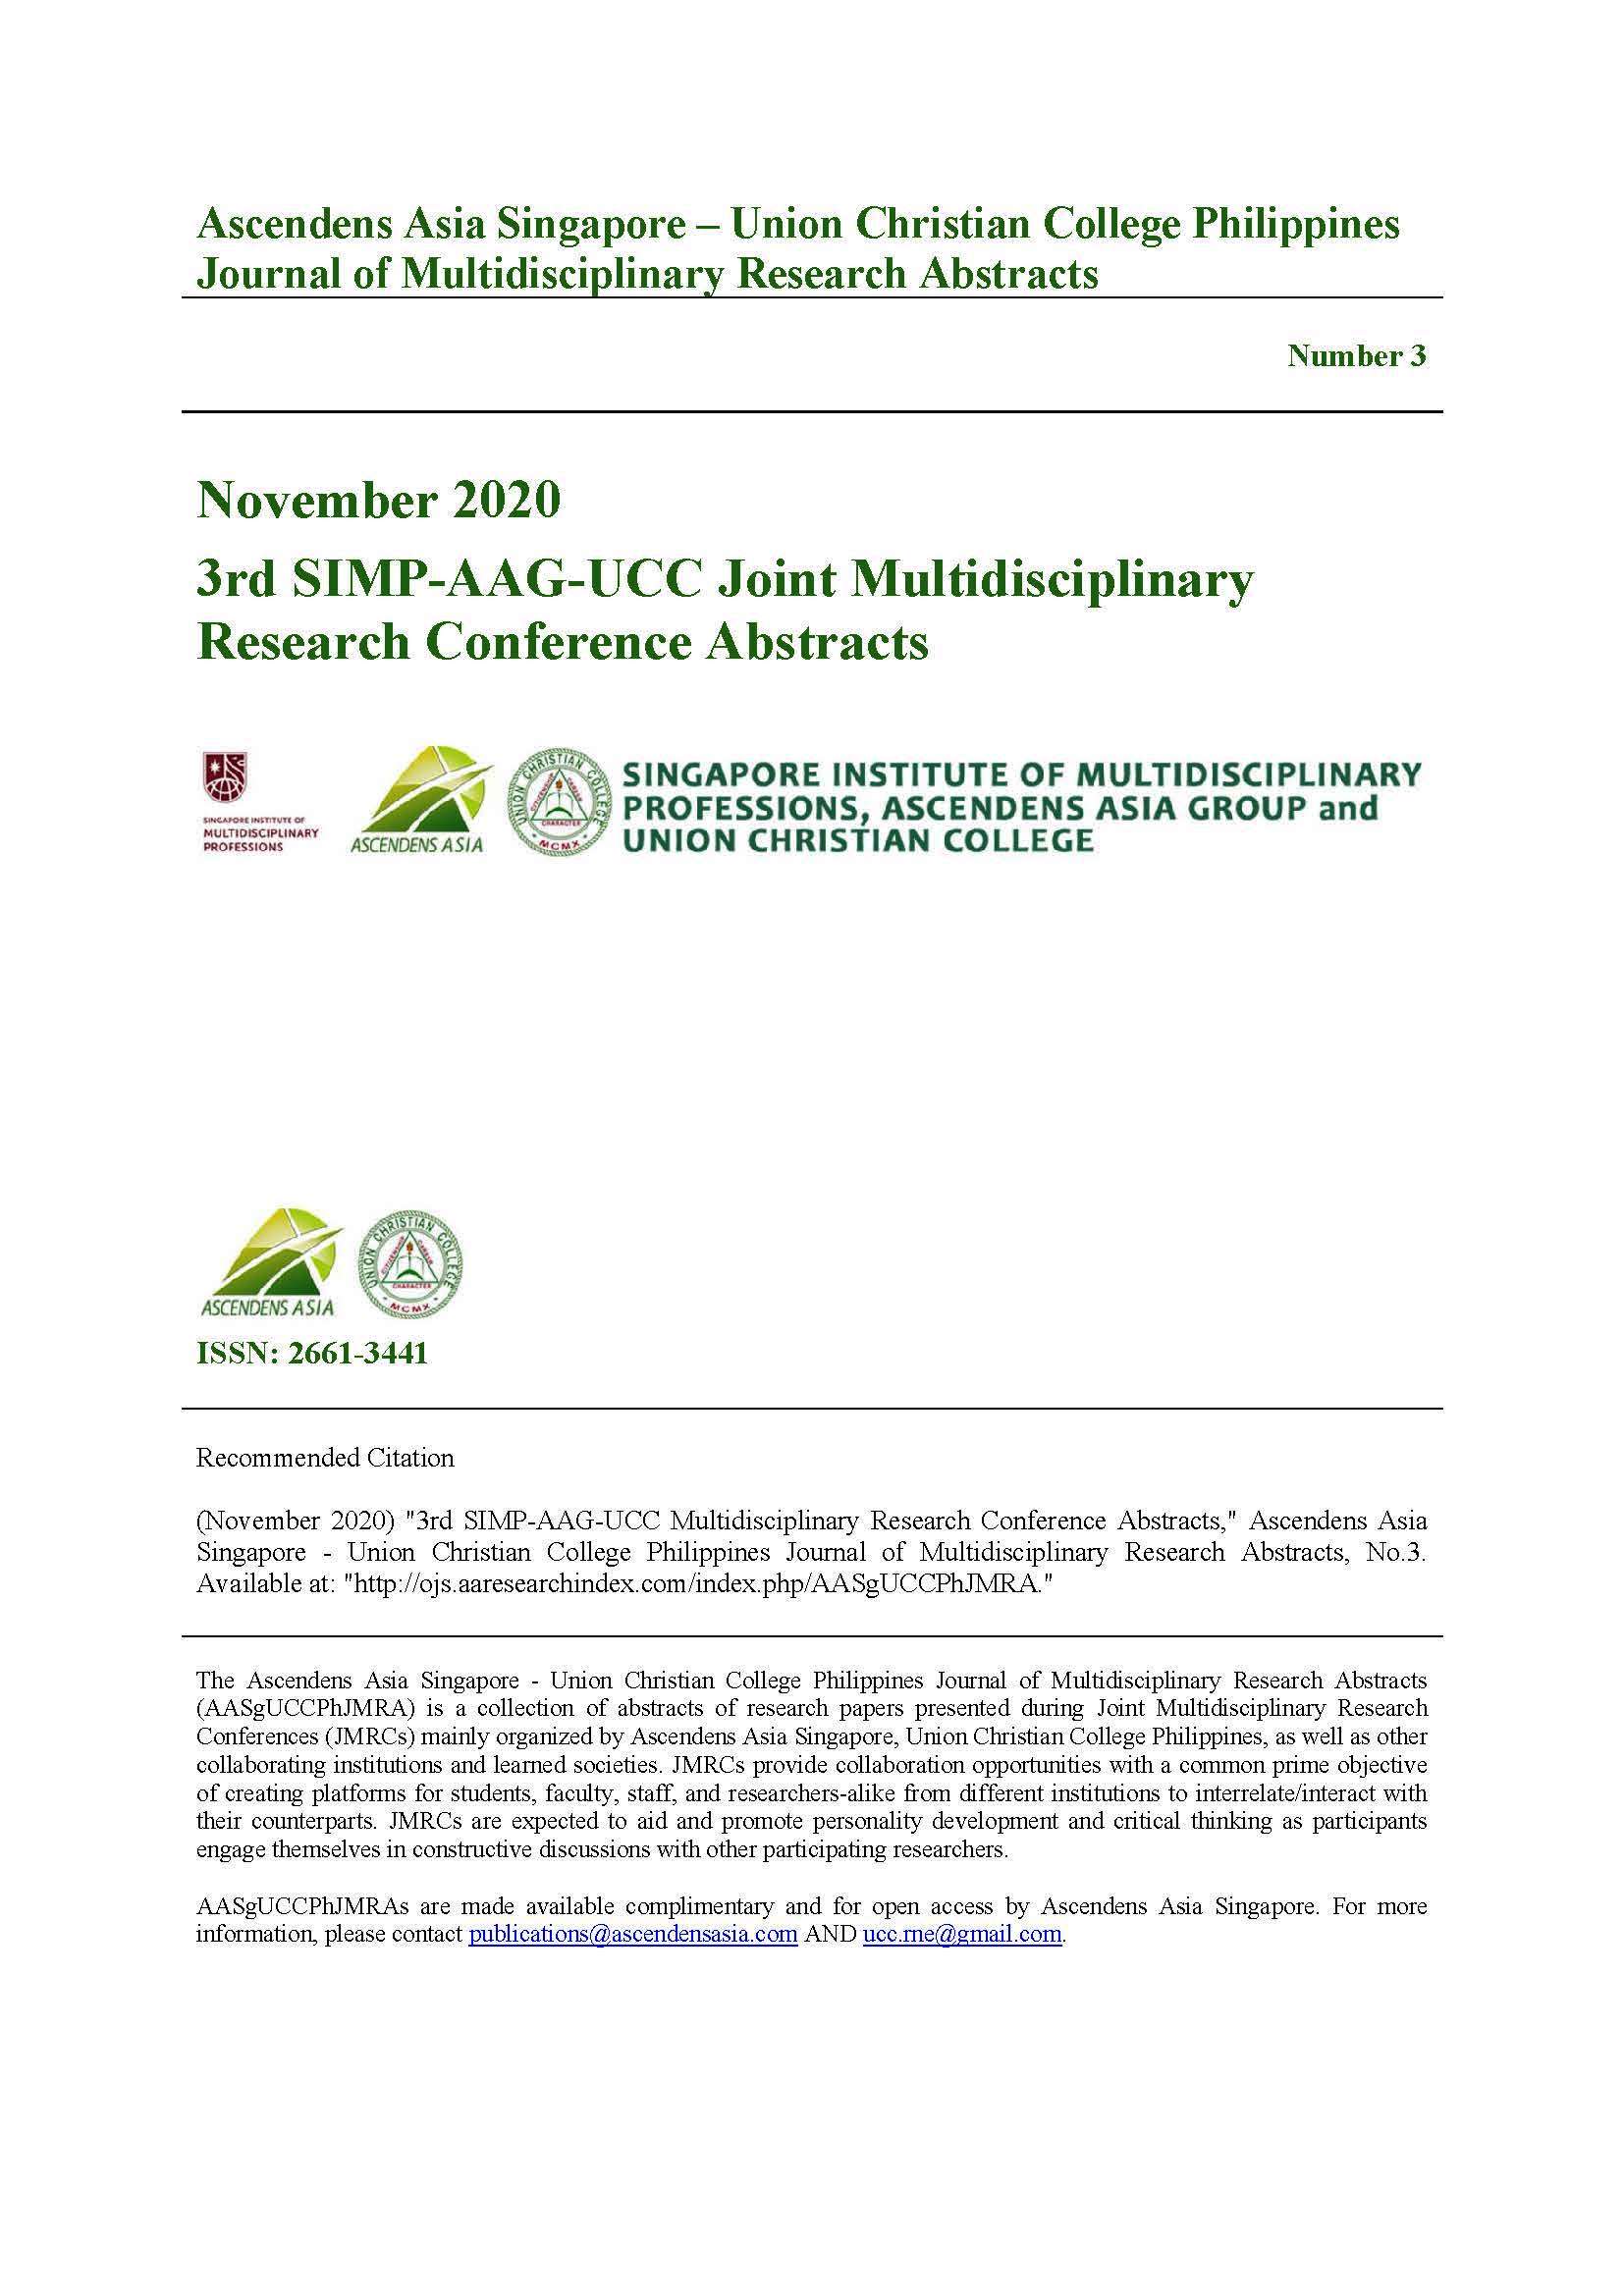 					View Vol. 3 No. 1 (2020): Ascendens Asia Singapore - Union Christian College Philippines Journal of Multidisciplinary Research Abstracts
				